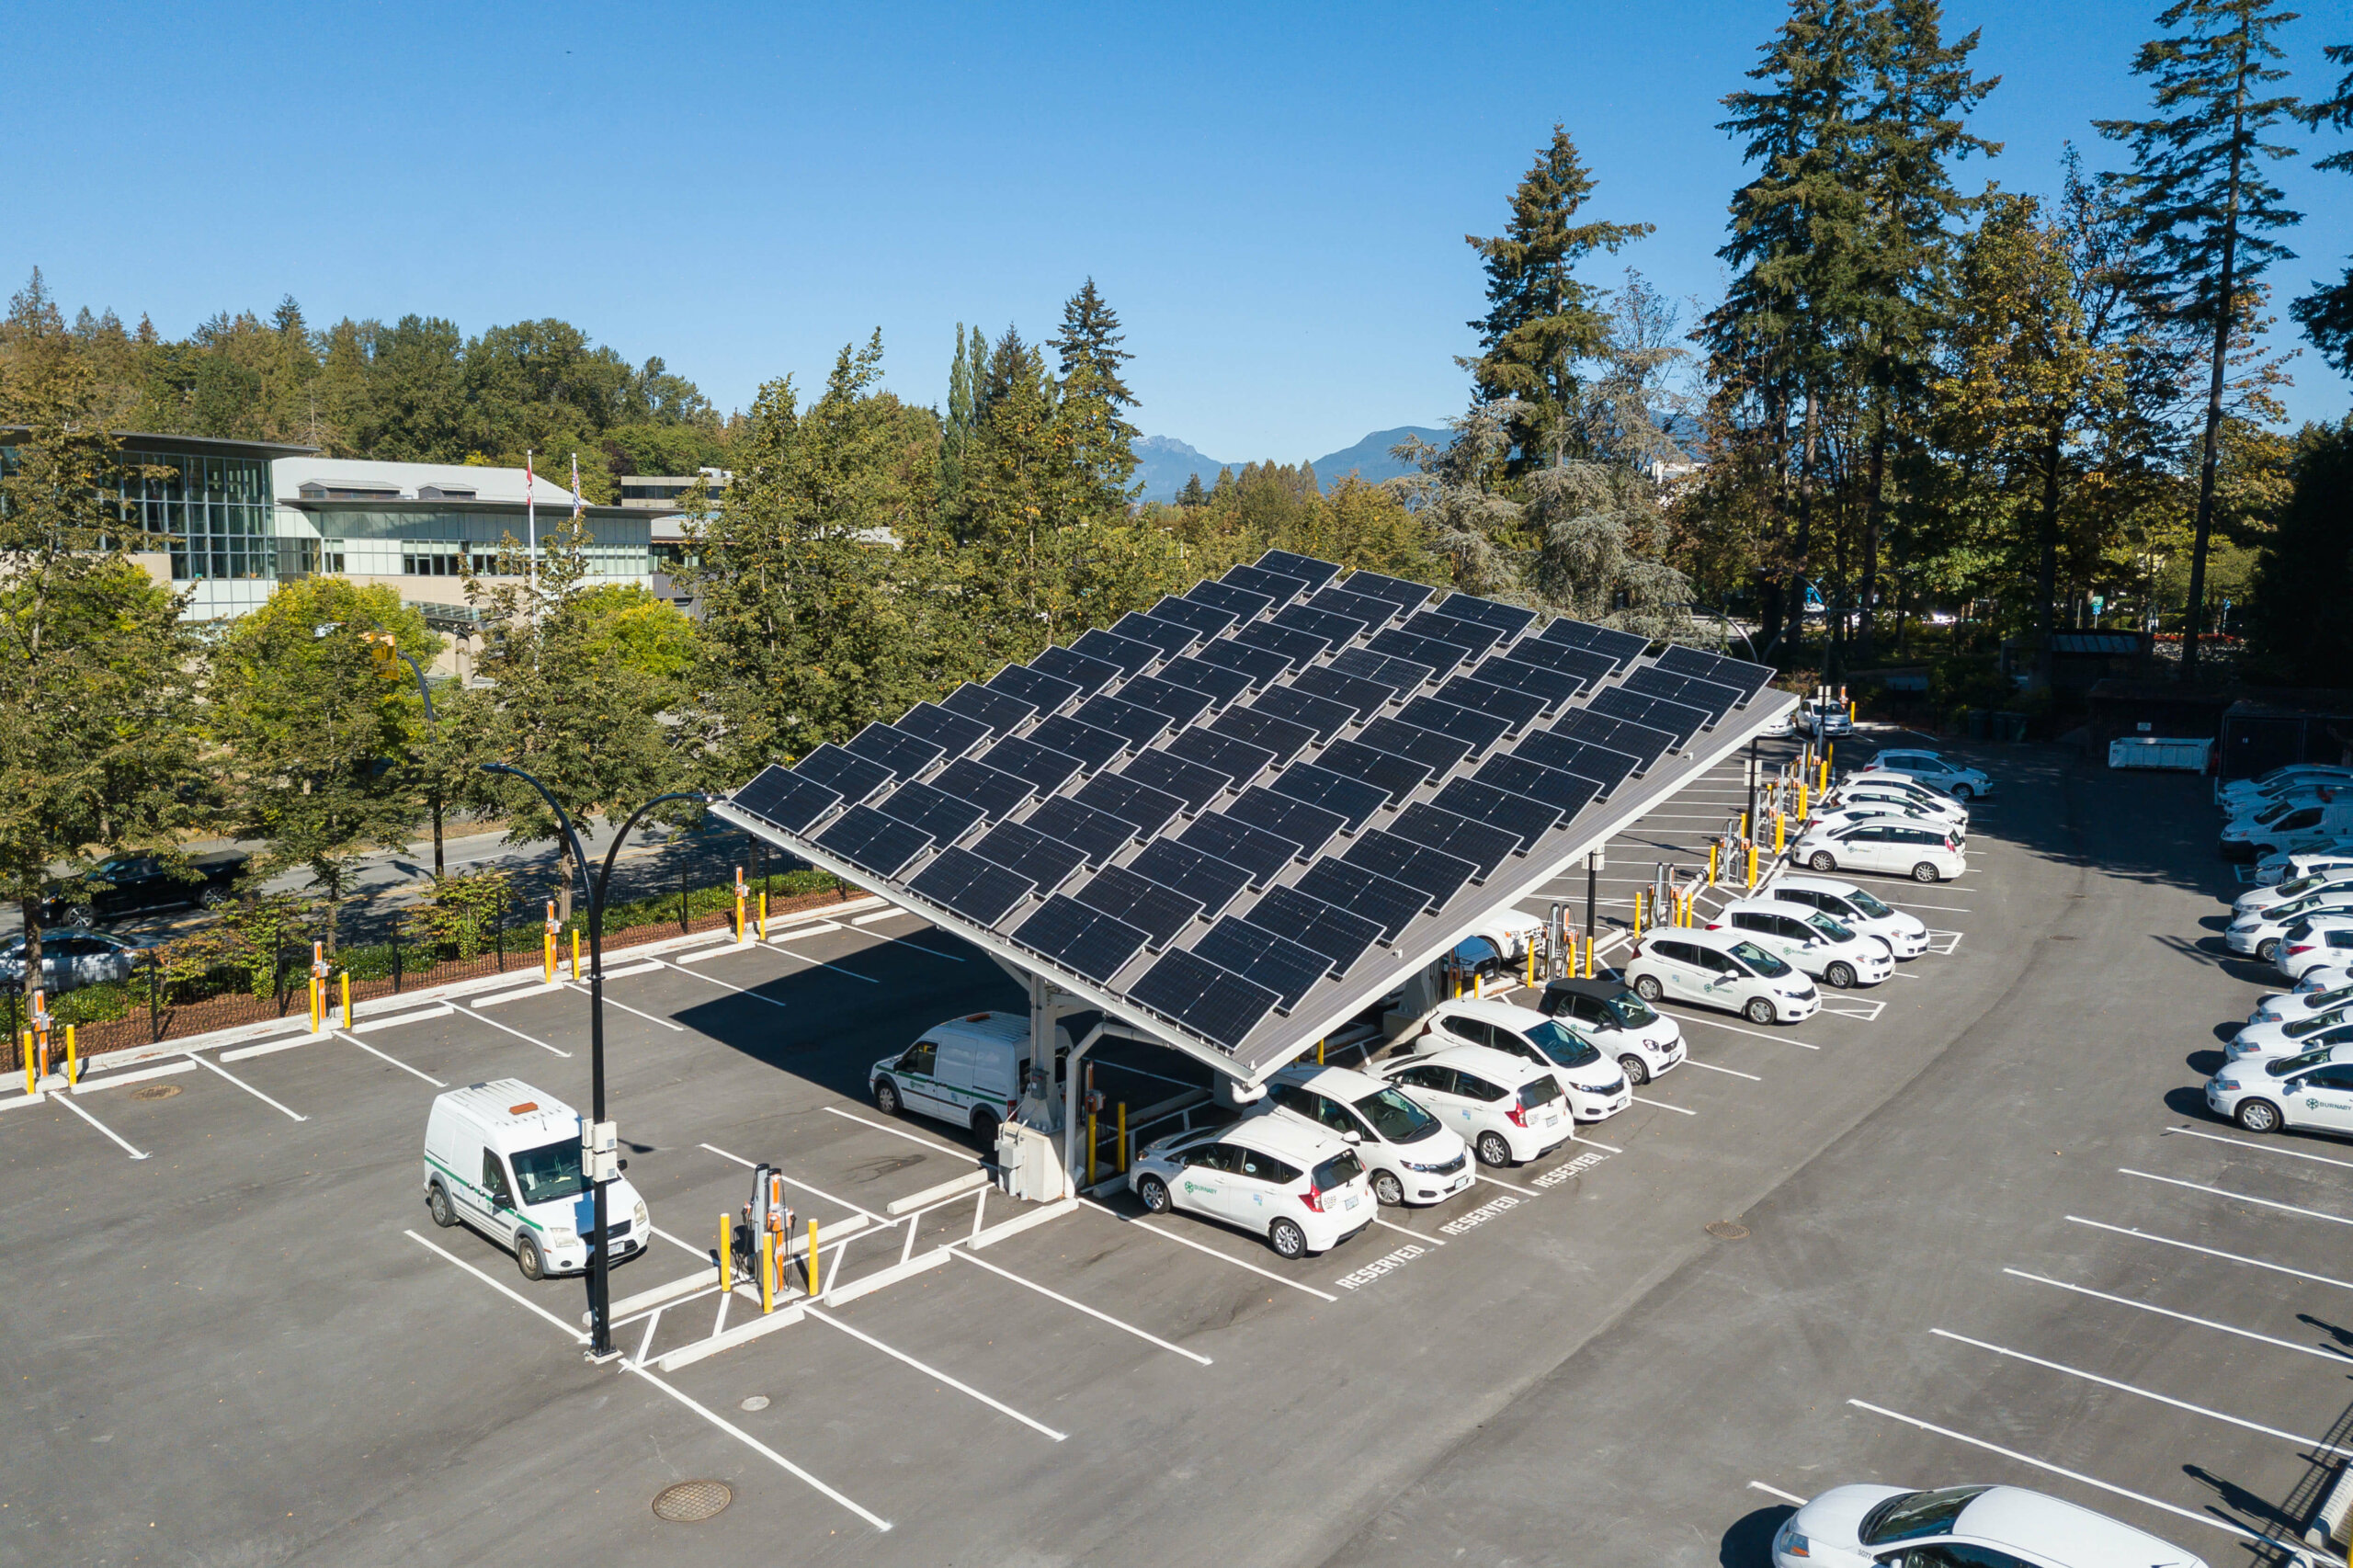 City Hall Fleet Electric Vehicle Charging Stations and Solar Canopy